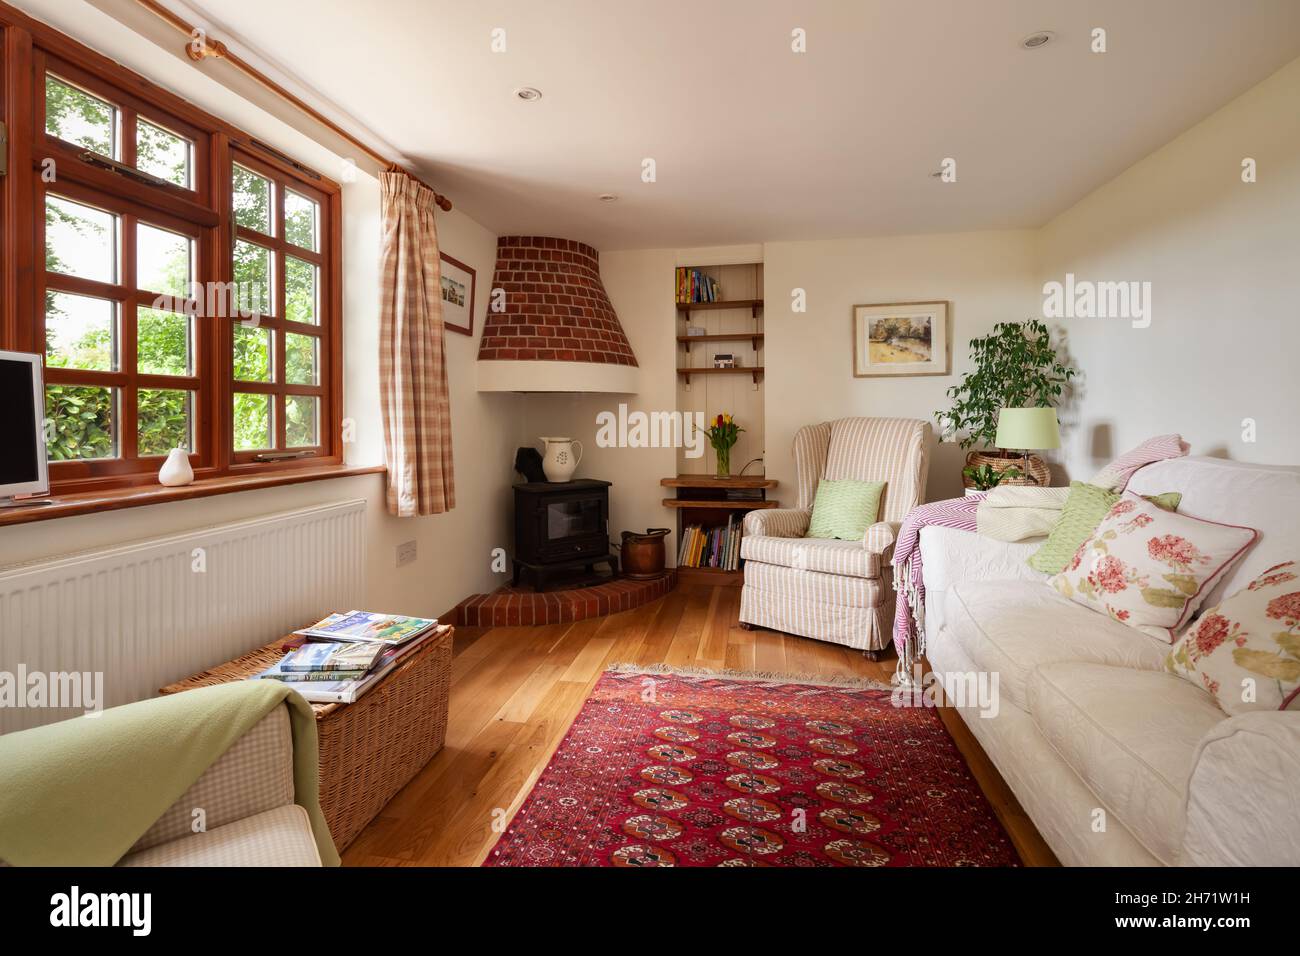 Whepstead, Suffolk, England - June 2 2020: Traditional home interior with exposed beams and brick fireplace with stove. Furnished with rug and sofa Stock Photo